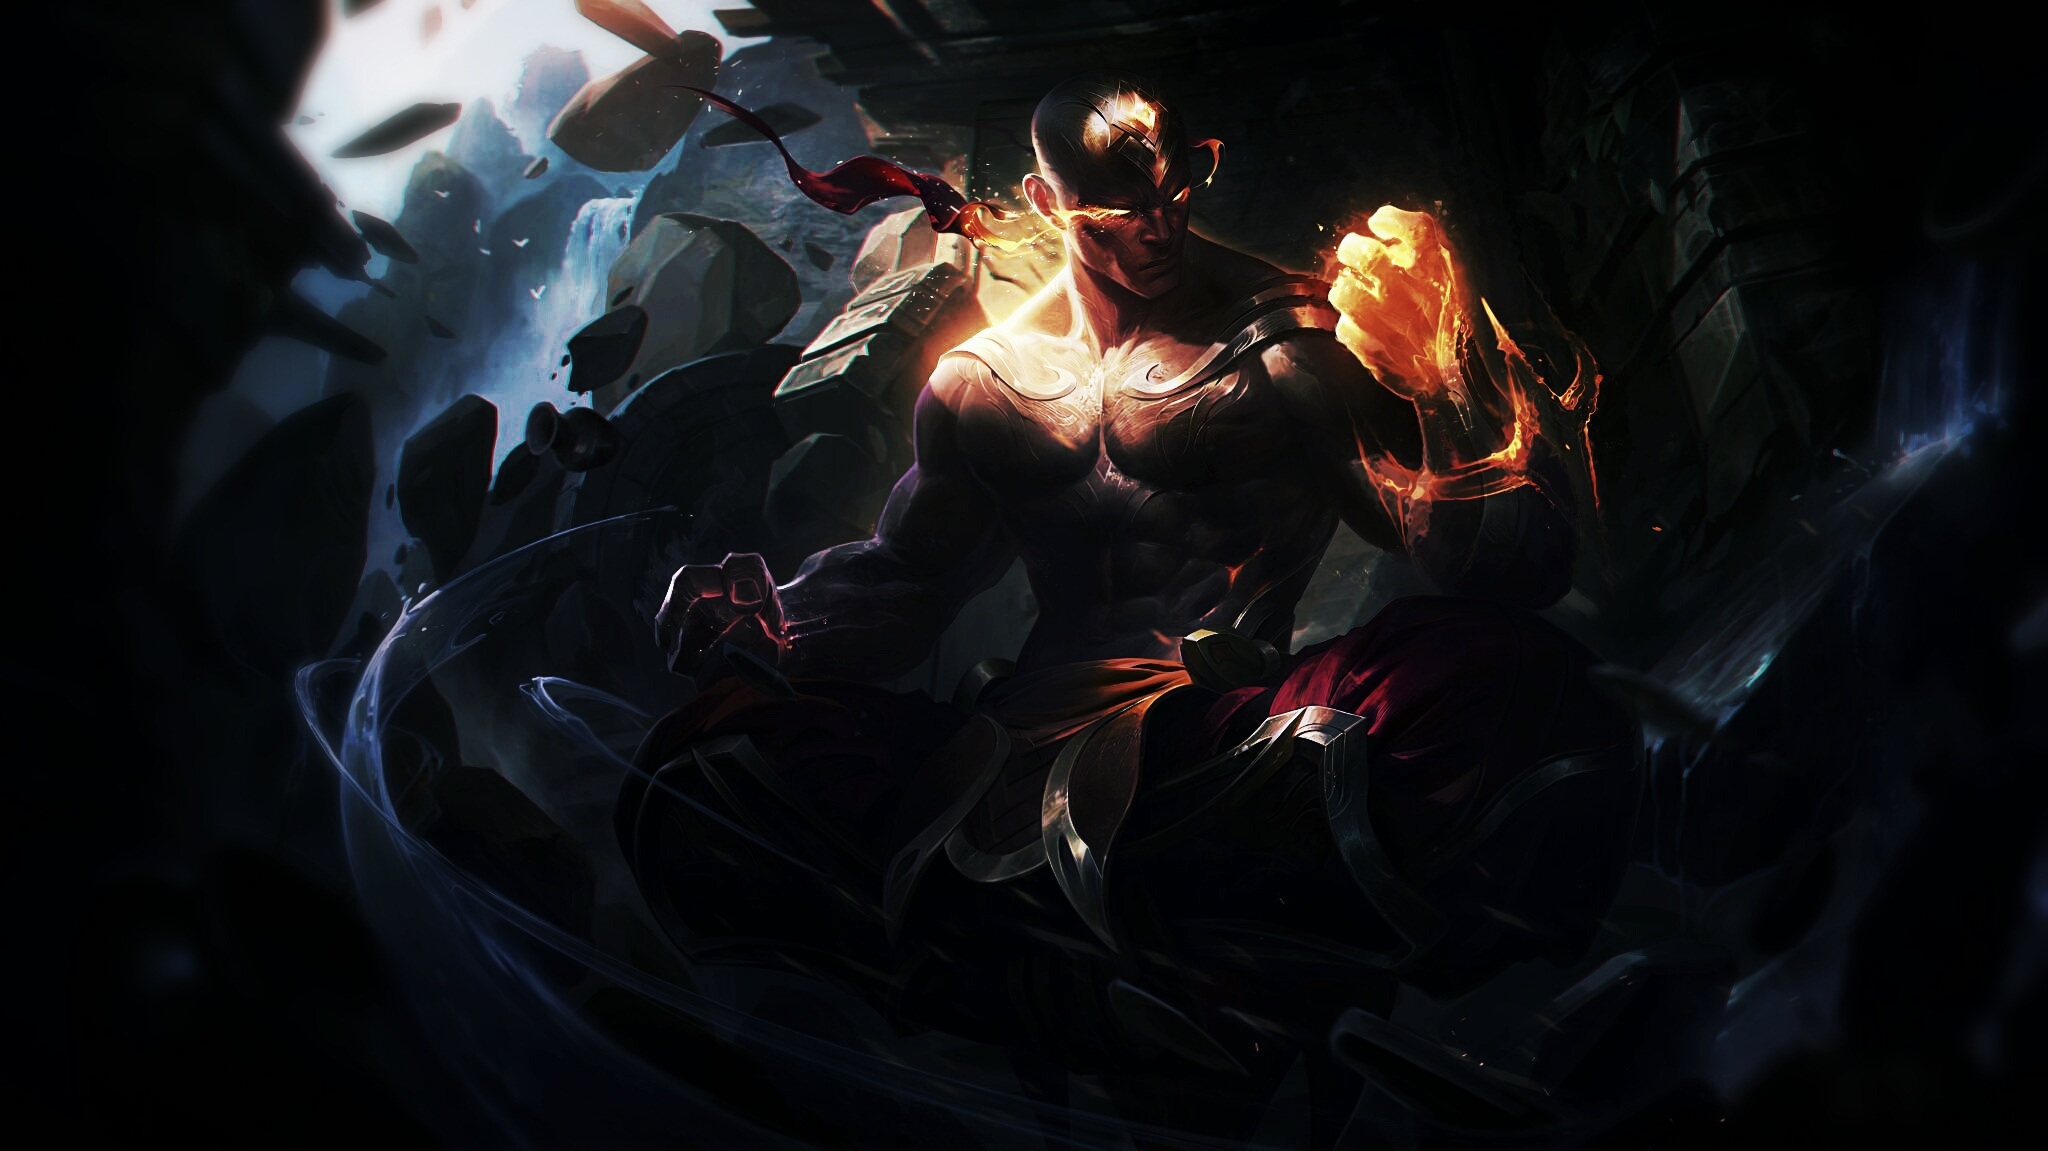 Lee Sin League Of Legends Hd Hd Games 4k Wallpapers Images